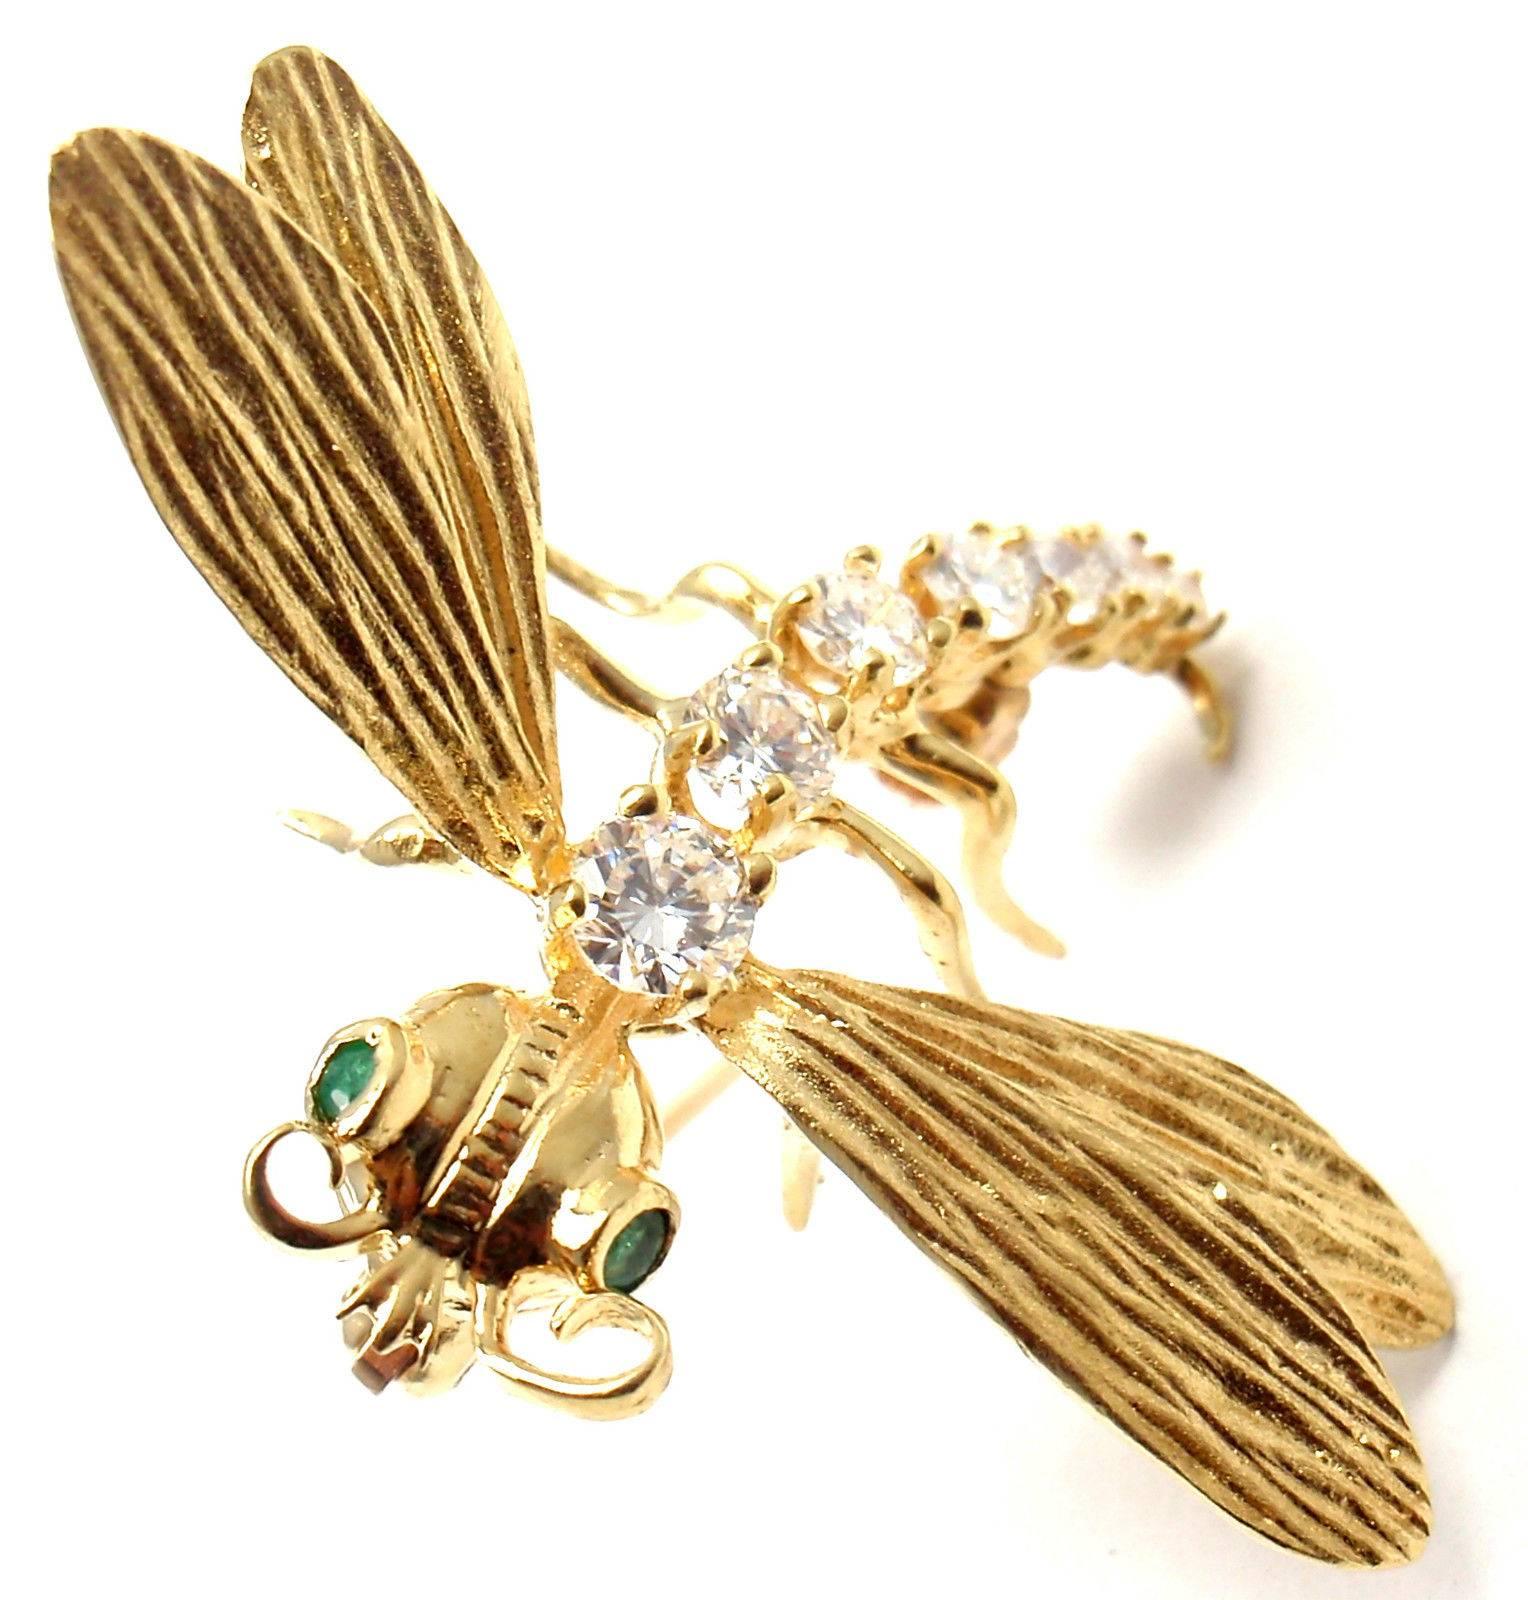 18k Yellow Gold Diamond Dragonfly Pin Brooch by Herbert Rosenthal.
With 7 round brilliant cut diamonds VS1 Clarity, G Color total weight approx. .60ct

Details:
Measurements Brooch: 33mm x 26mm x 9mm
Weight: 3.9 grams
Stamped Hallmarks: HR